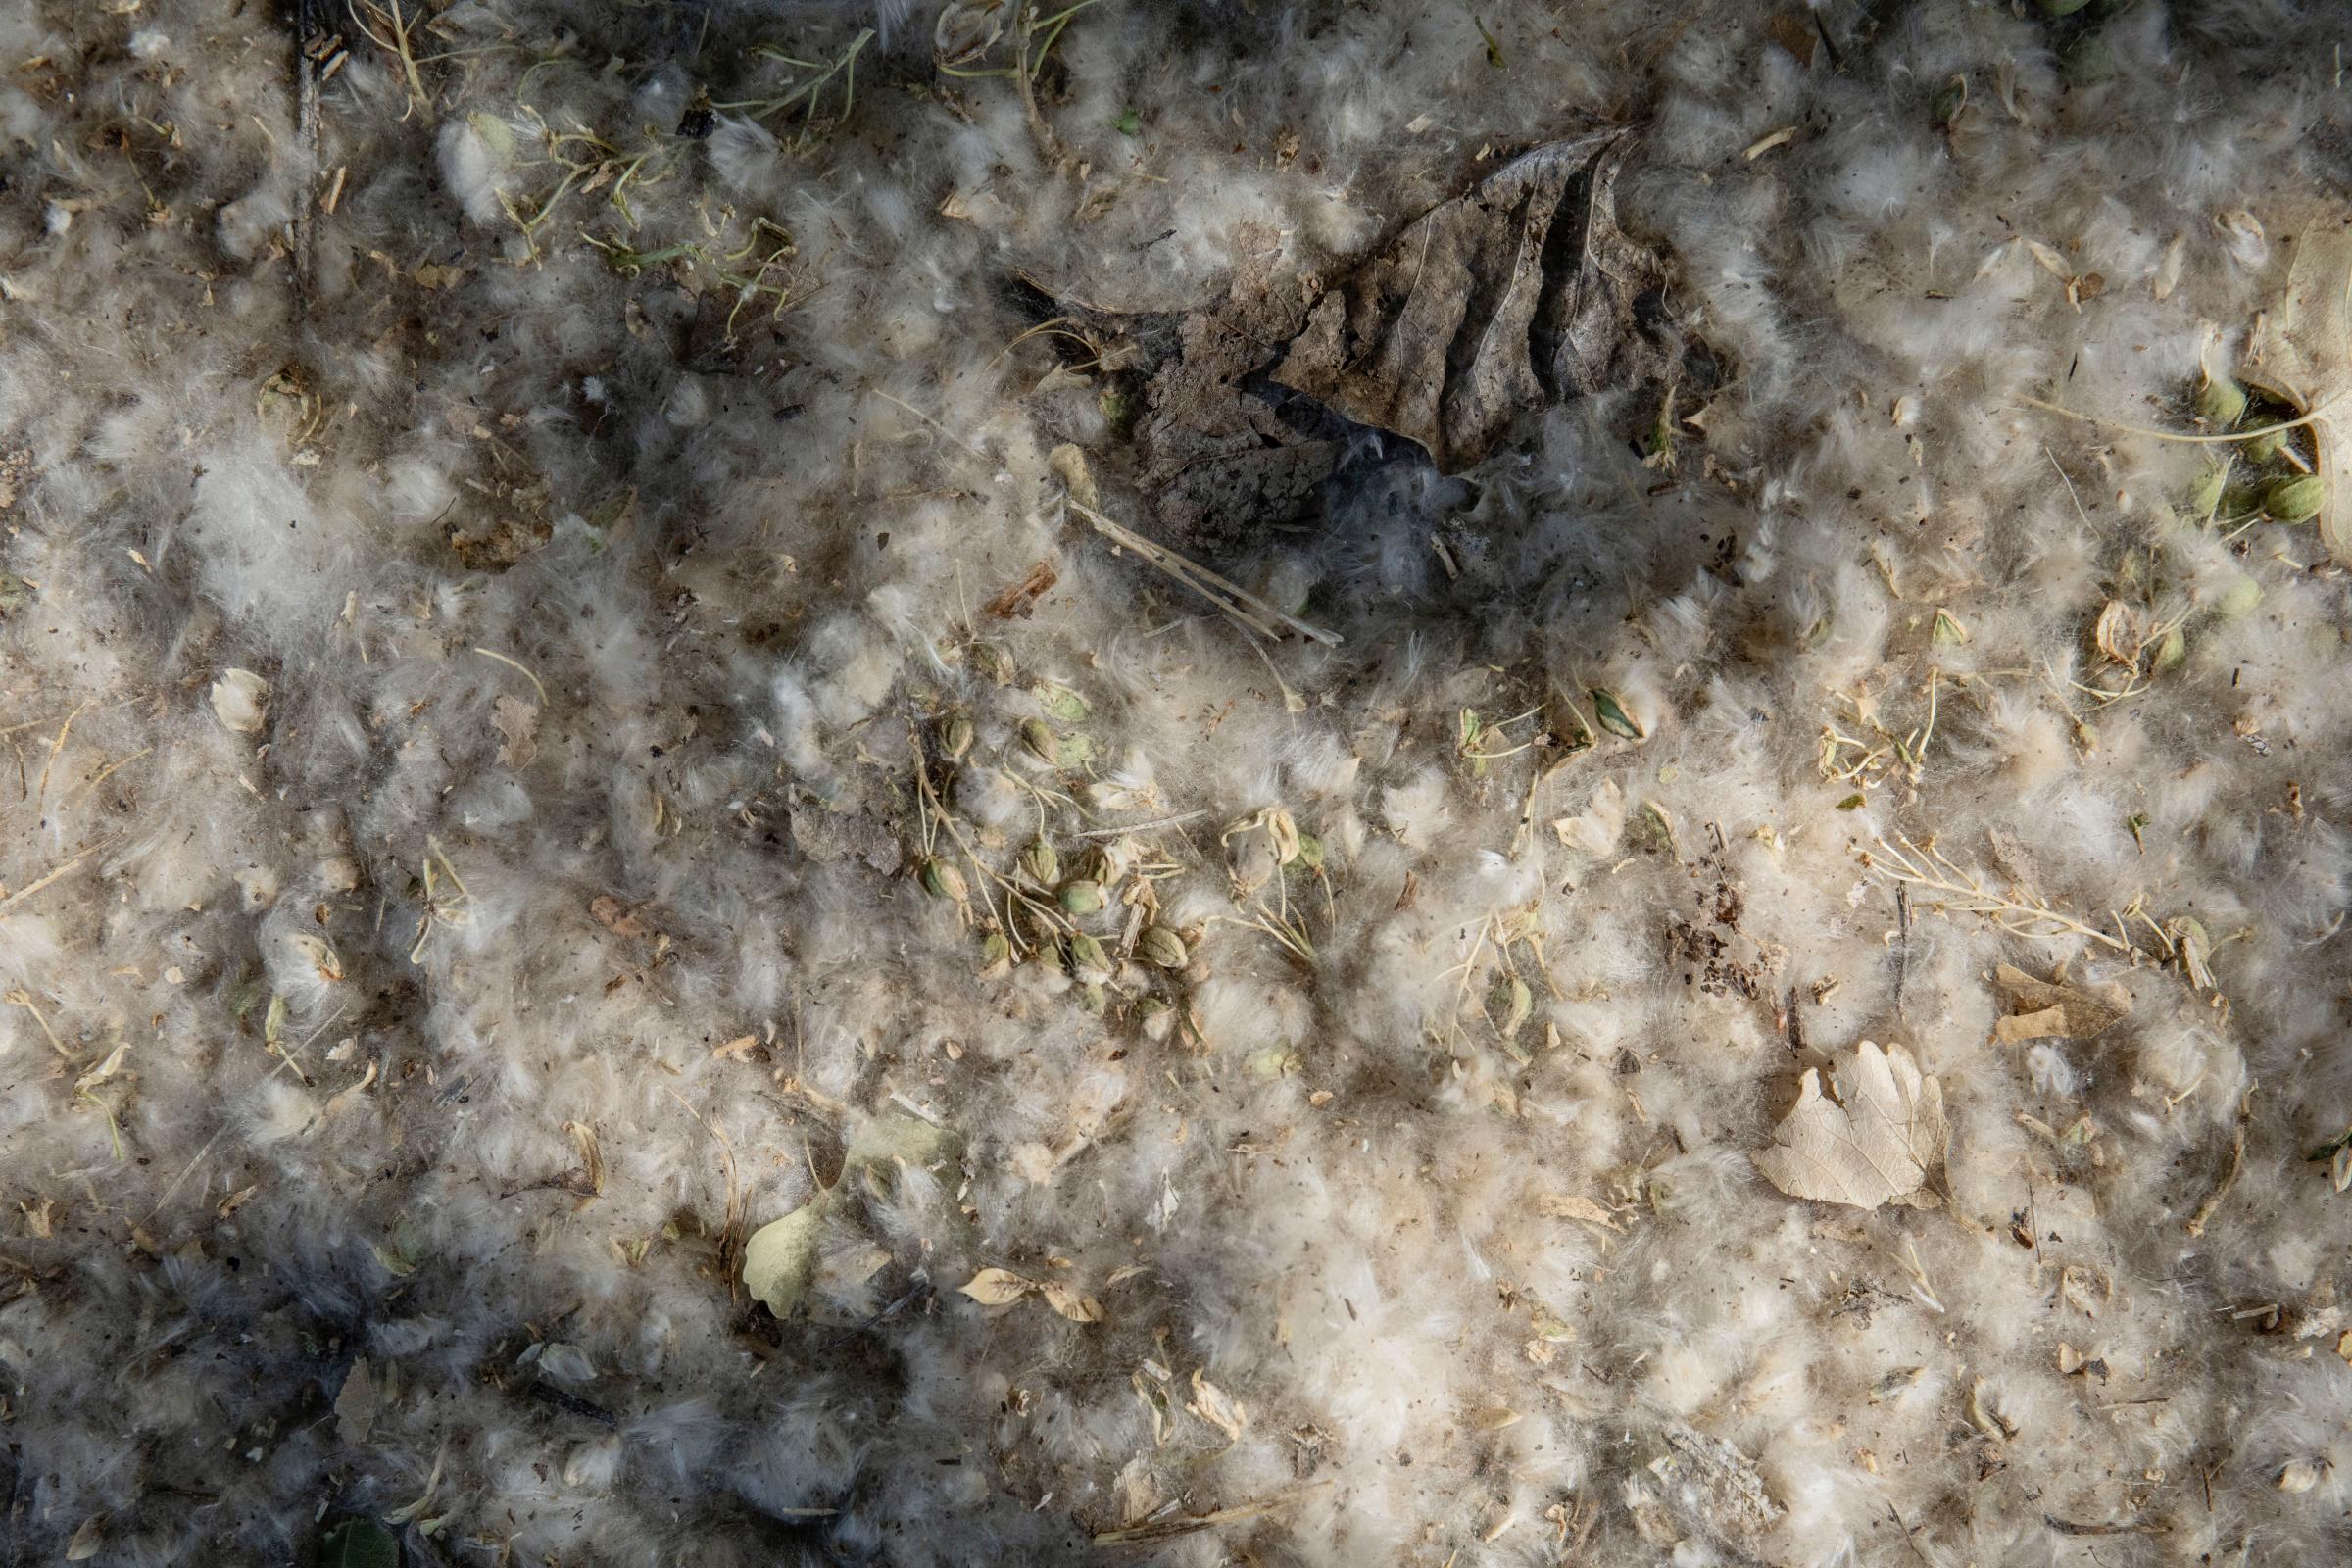 Crisis on the Rio Grande - A bed of cottonwood seeds.(Photo by Diana Cervantes for Source NM)